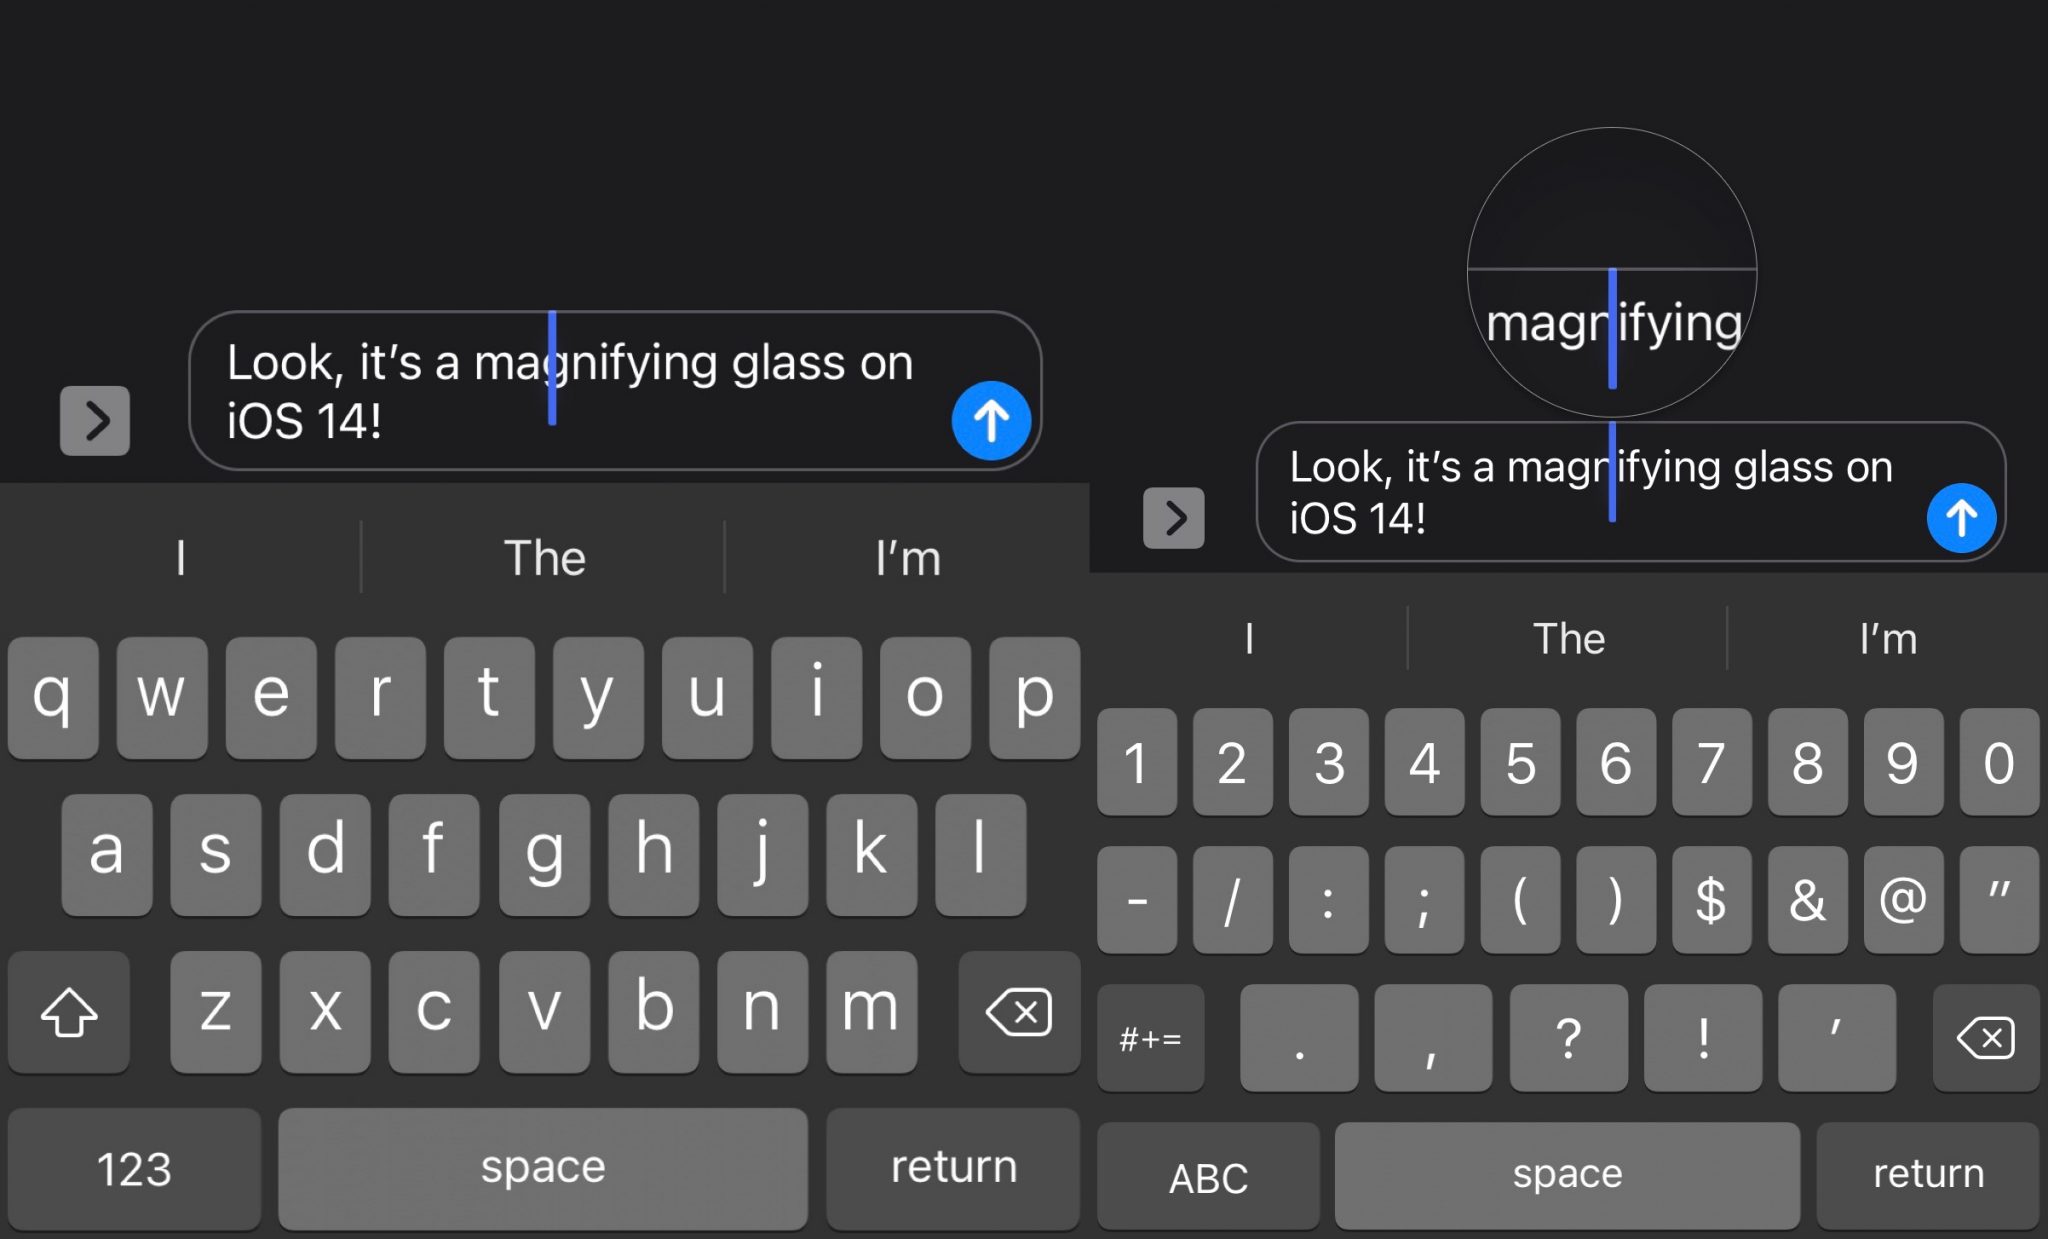 Loupe brings the text highlighting magnifying glass back on jailbroken iOS 14 devices.